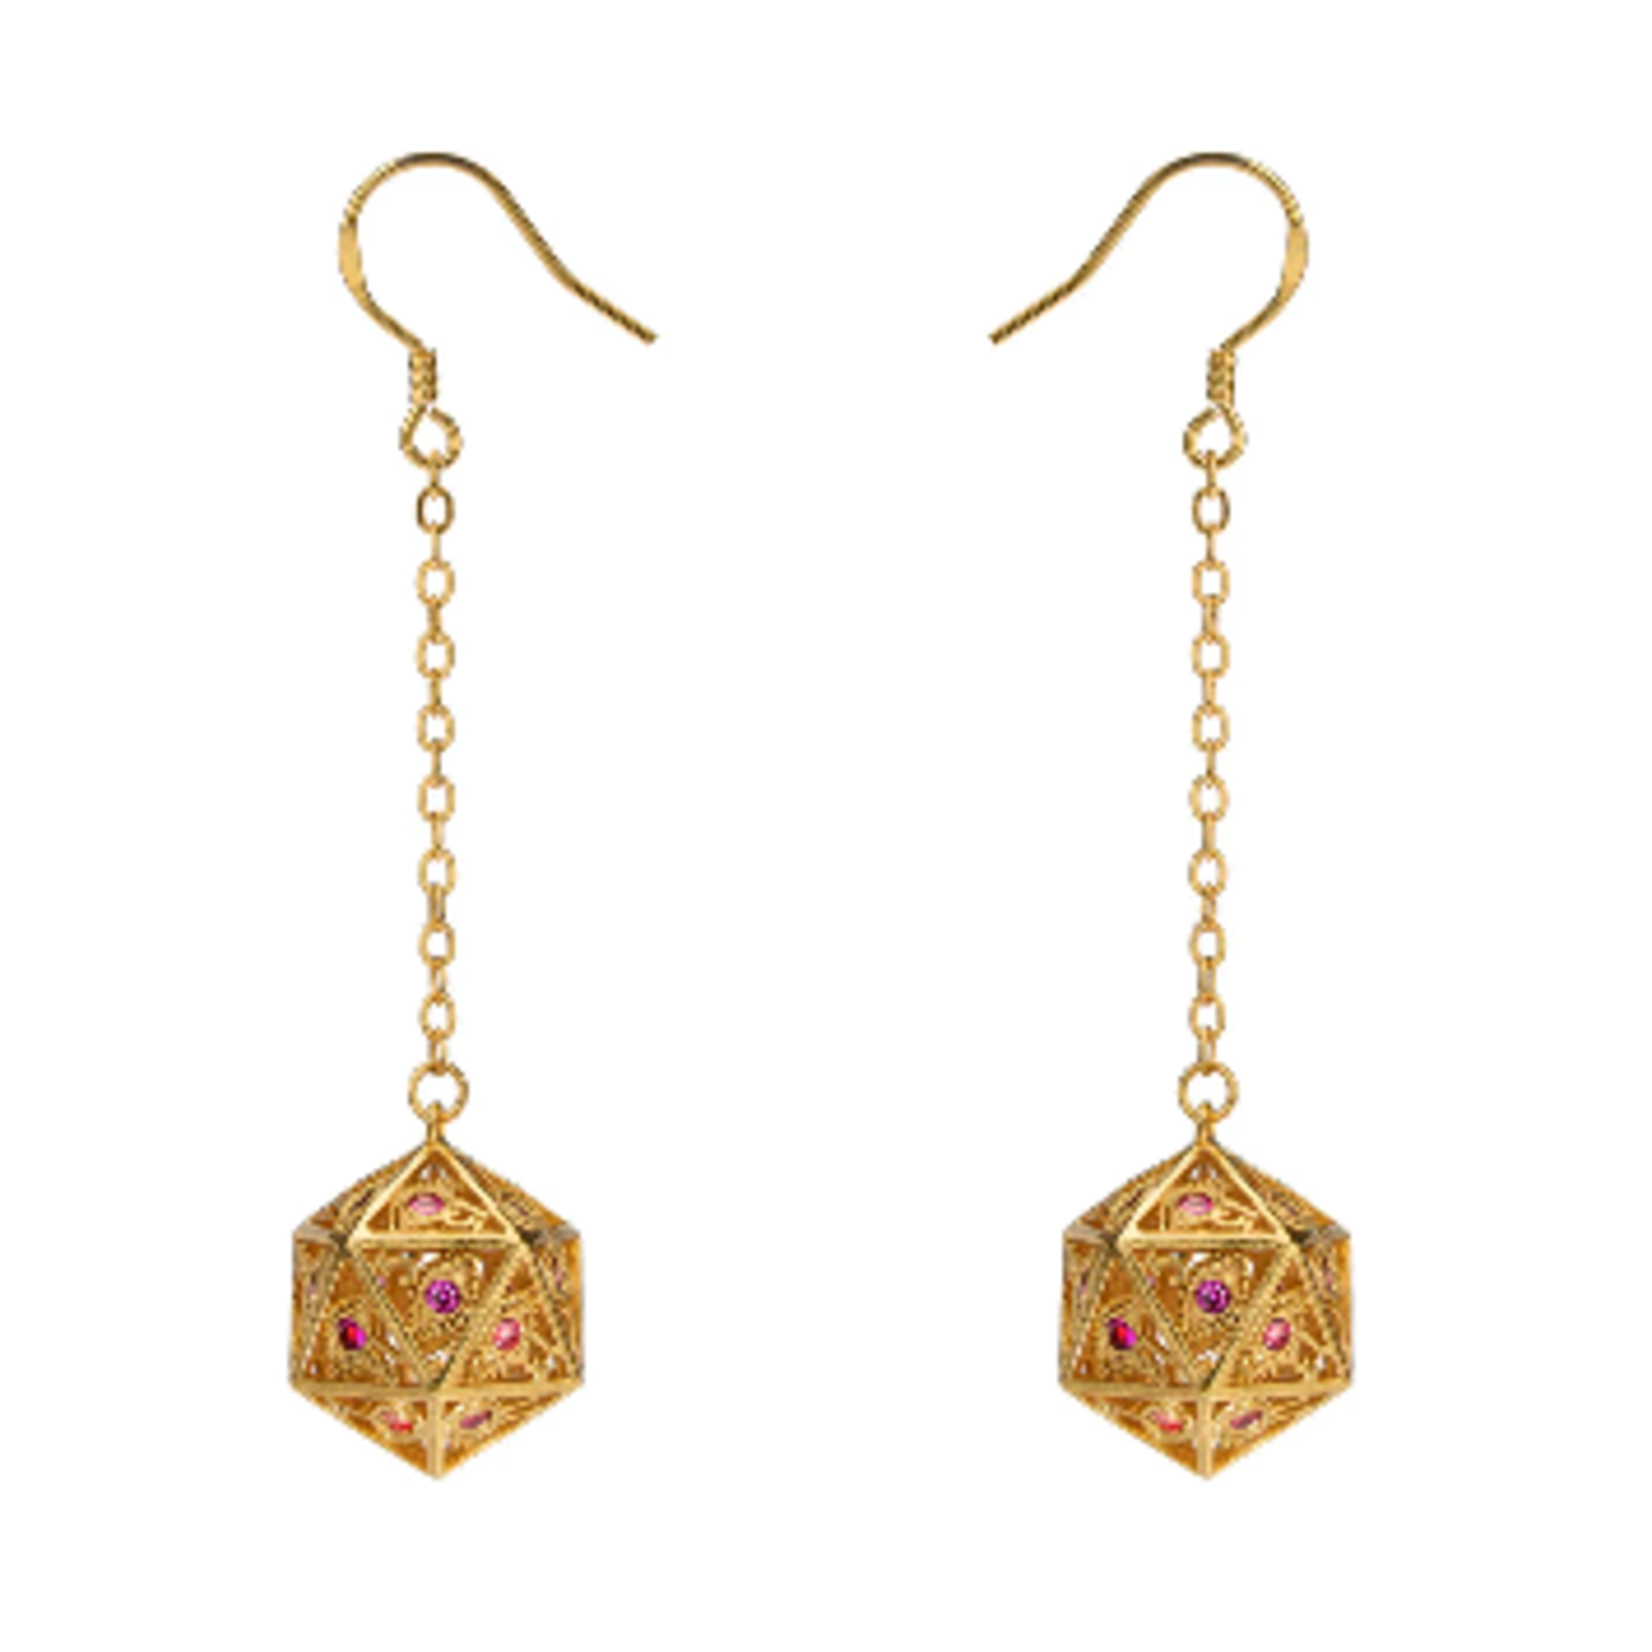 Dragon's Eye D20 Dice Earrings - Gold with Ruby Red Gems